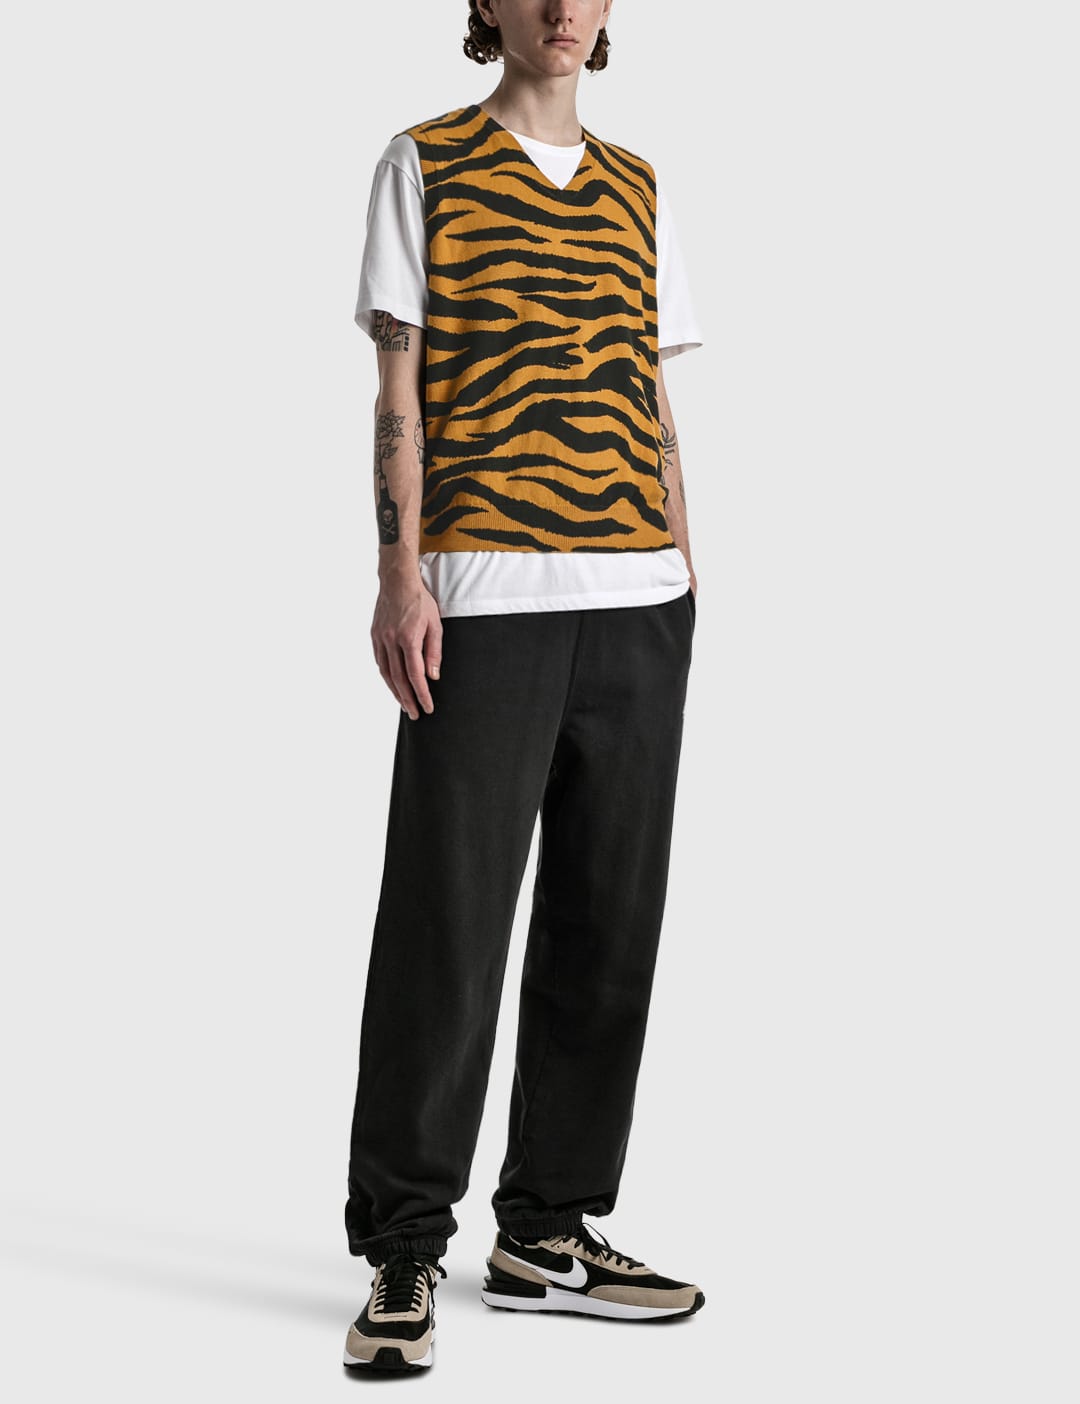 Stüssy - Tiger Printed Sweater Vest | HBX - Globally Curated 